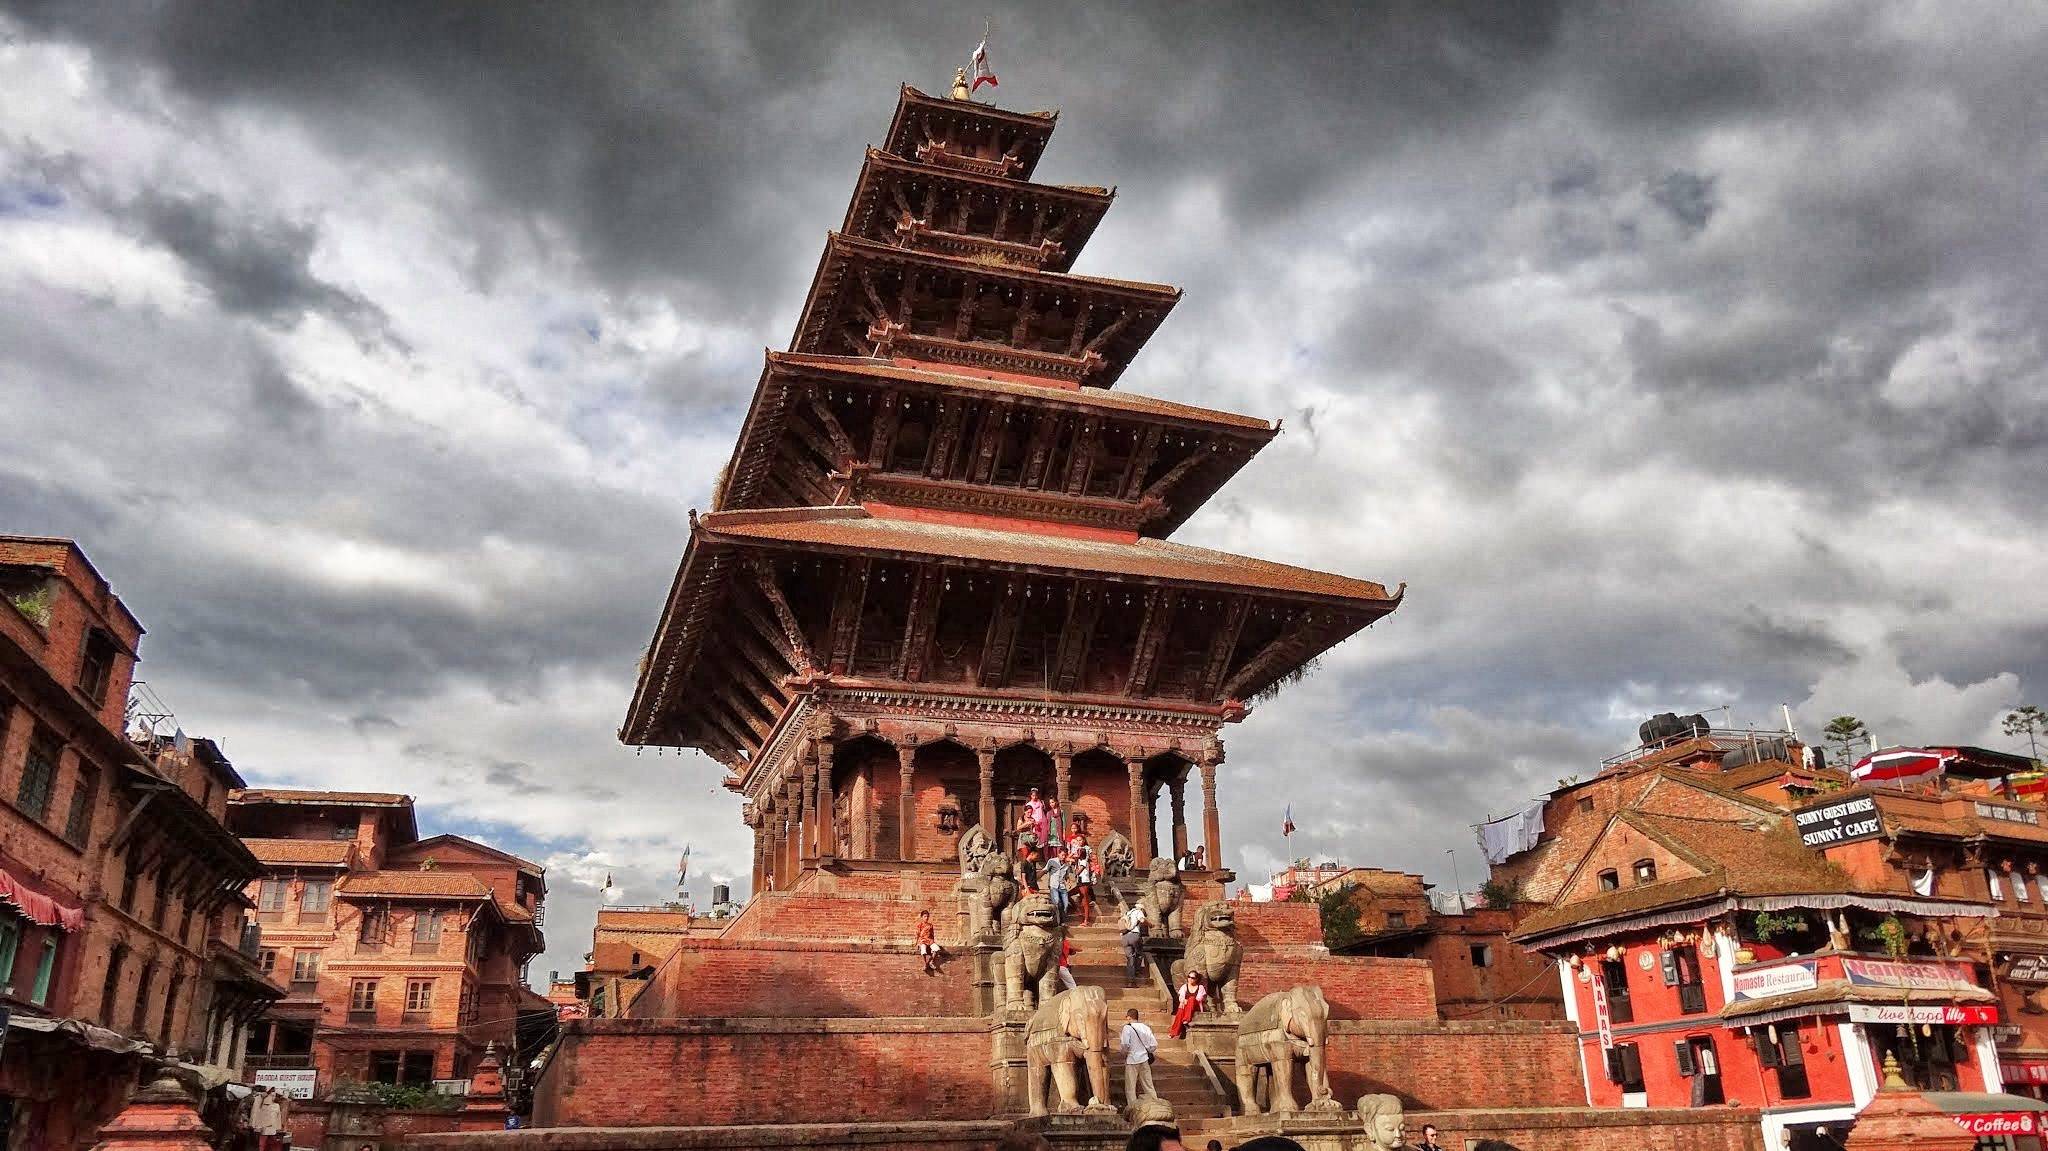 Pashupatinath is one of the famous places in Kathmandu. 